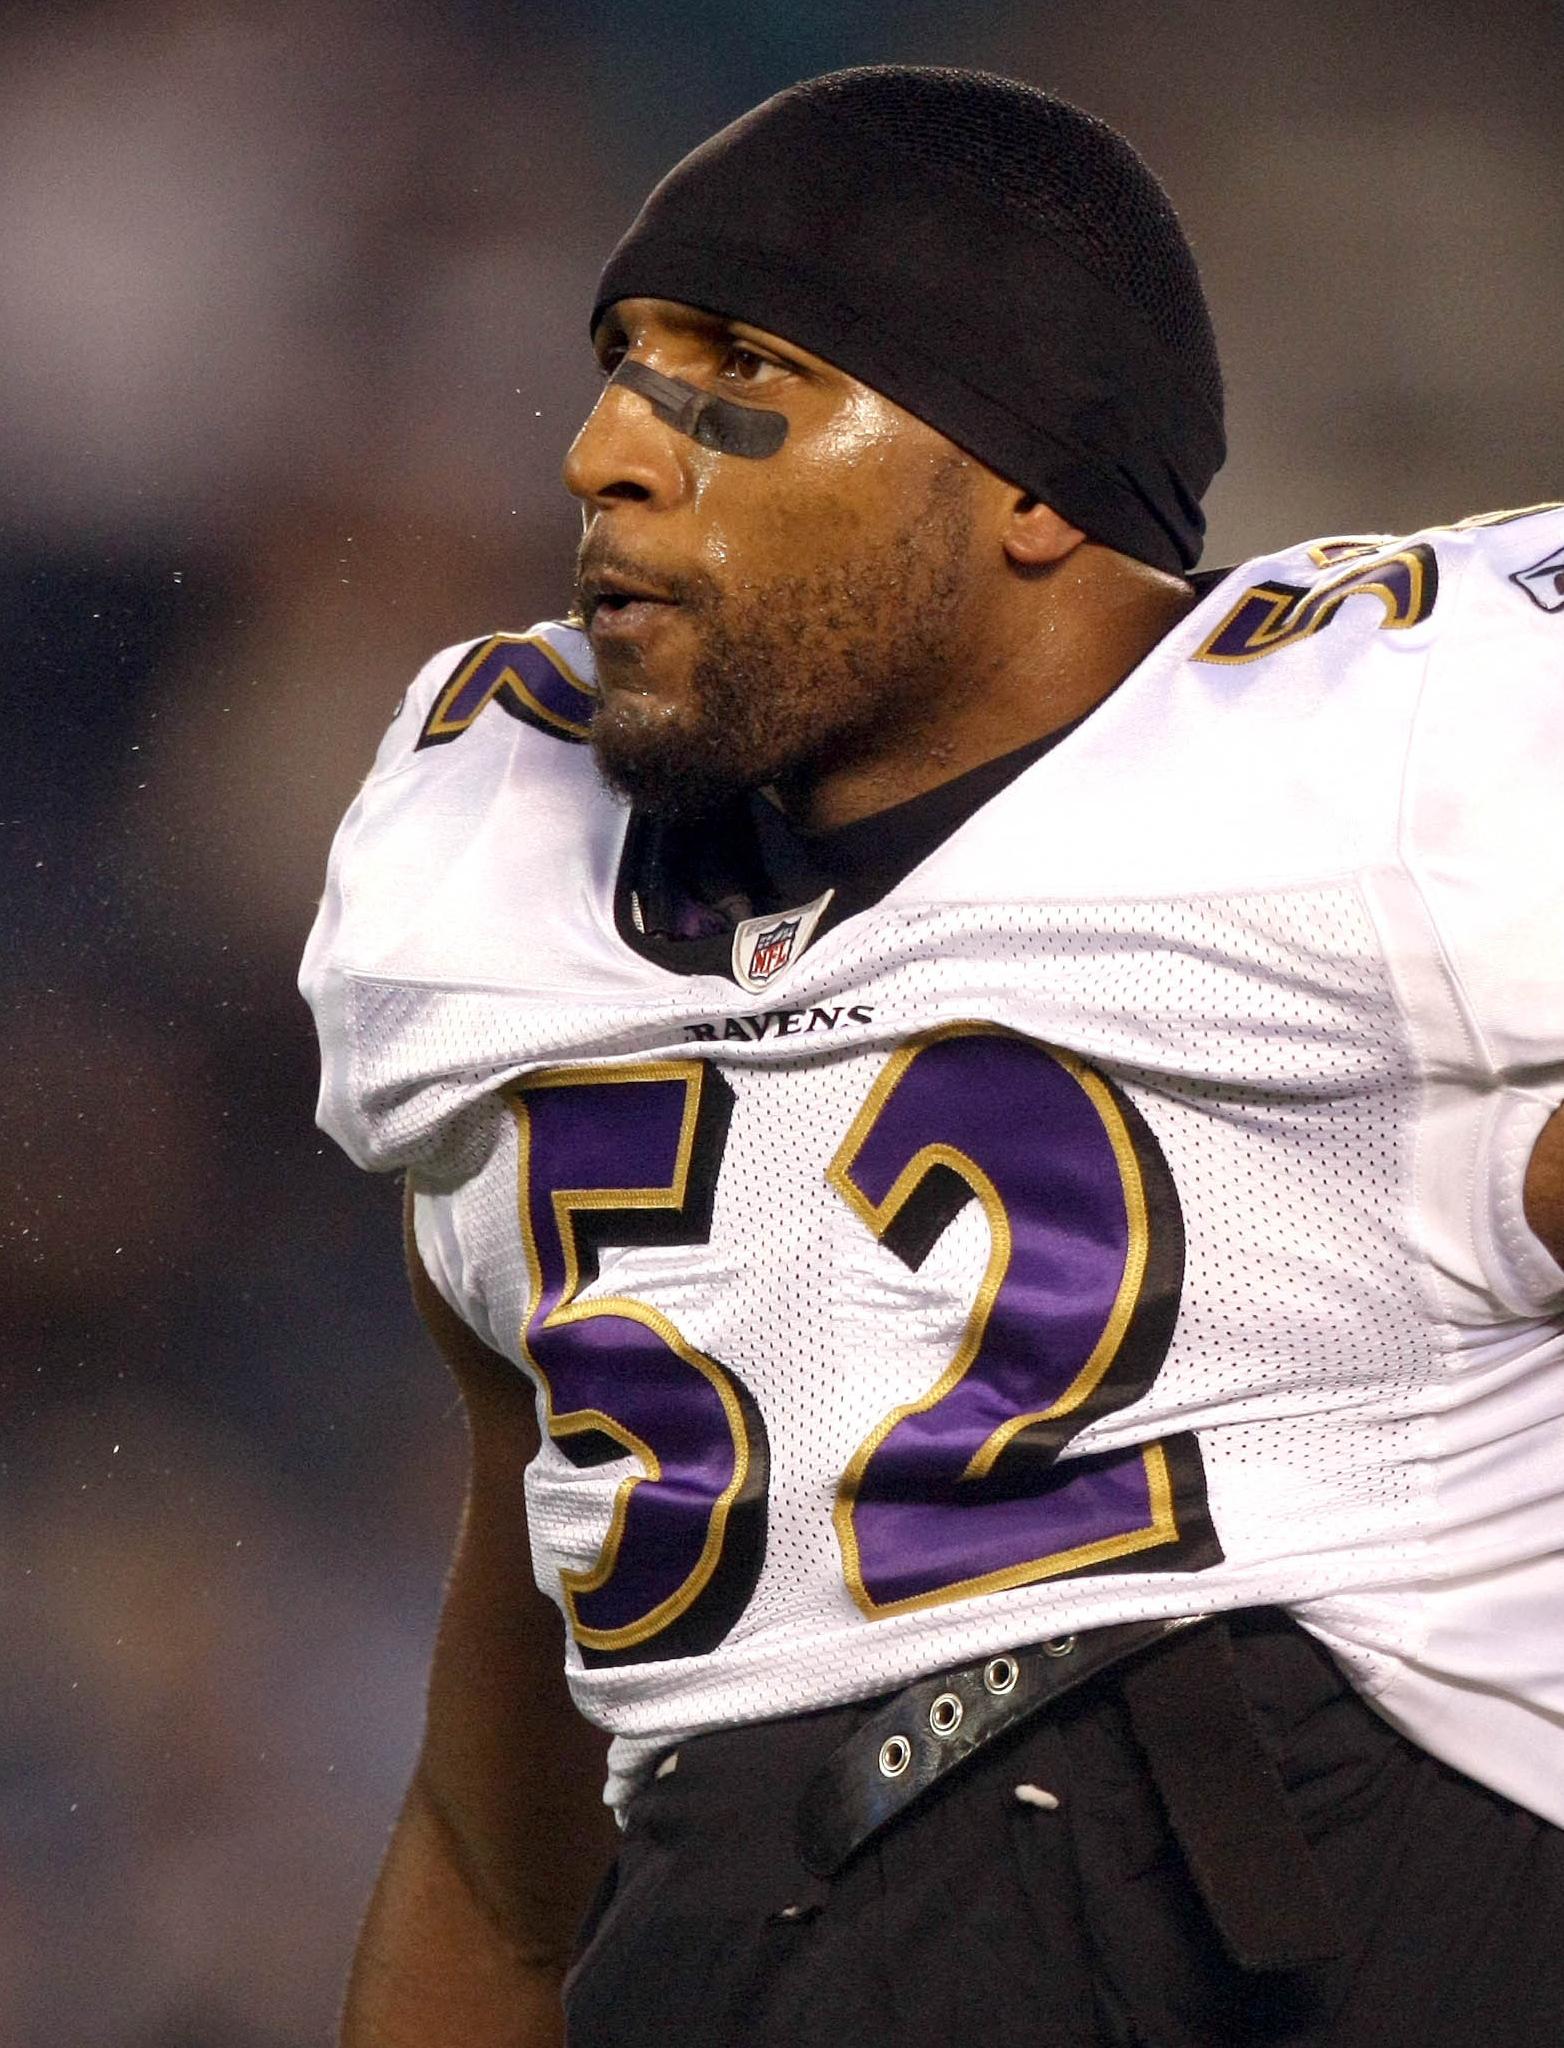 NFL: Ray Lewis tells Baltimore Ravens 'You got to play the game pissed off', NFL